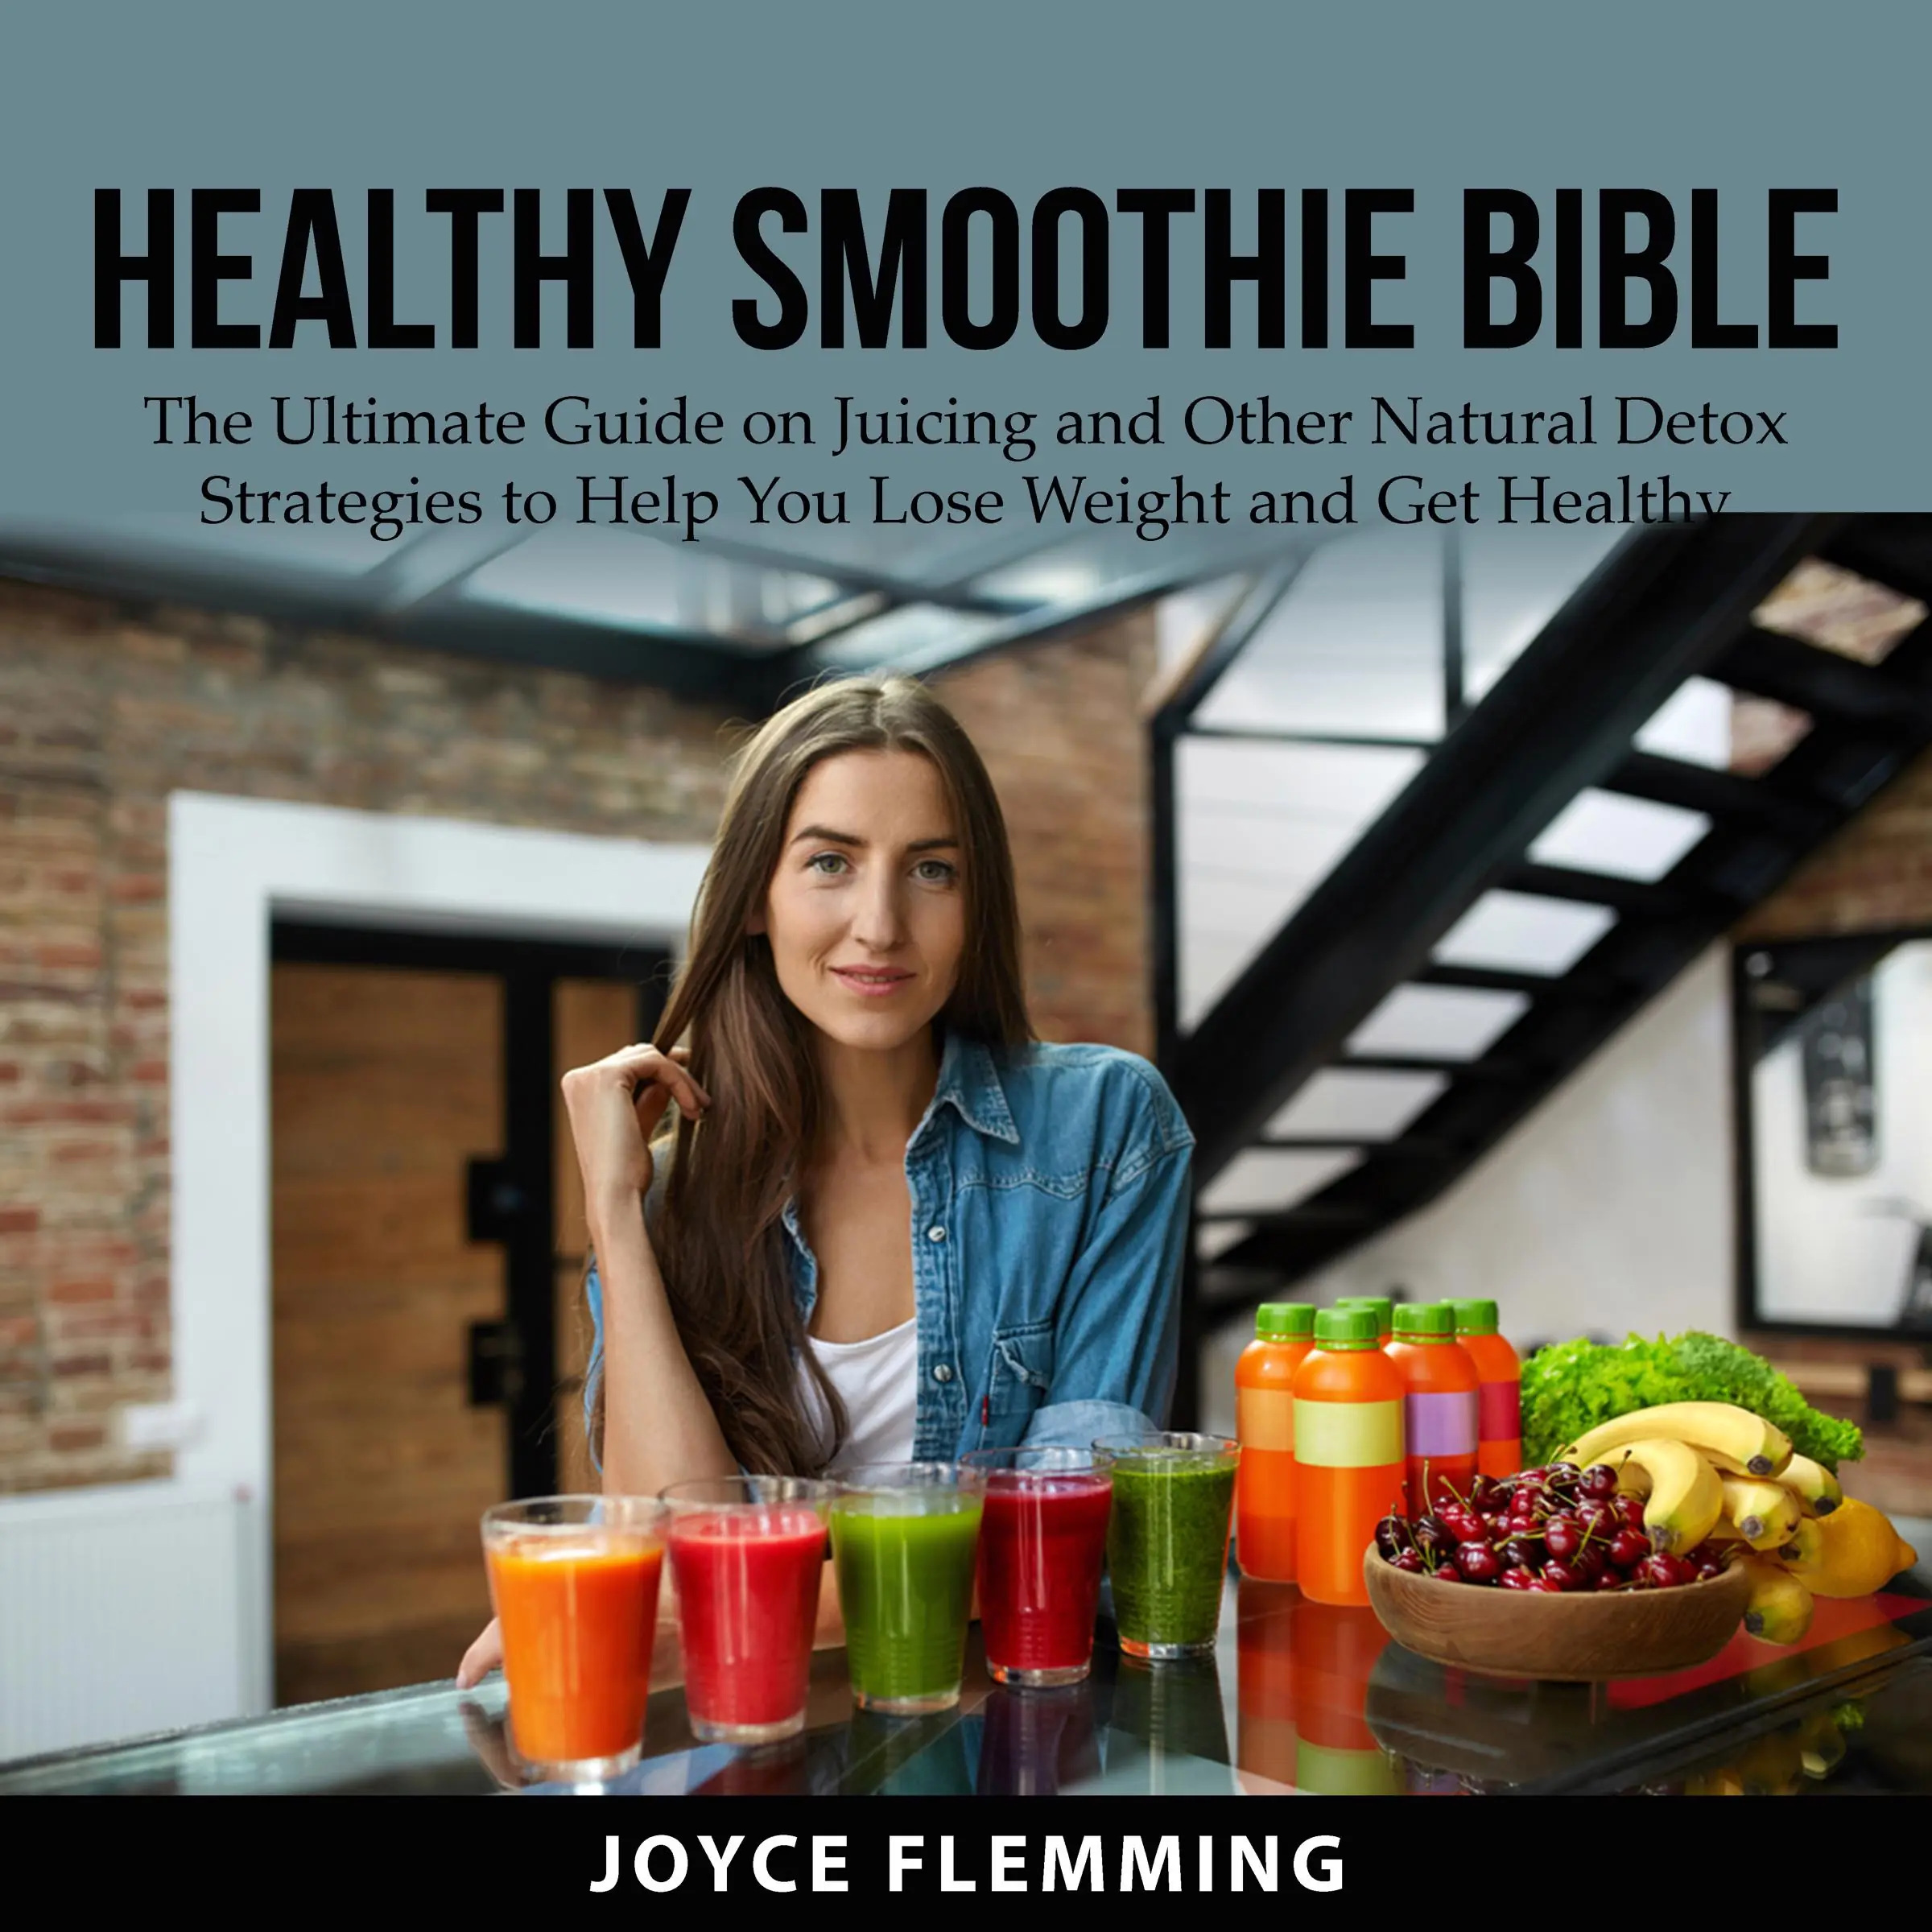 Healthy Smoothie Bible: The Ultimate Guide on Juicing and Other Natural Detox Strategies to Help You Lose Weight and Get Healthy Audiobook by Joyce Flemming